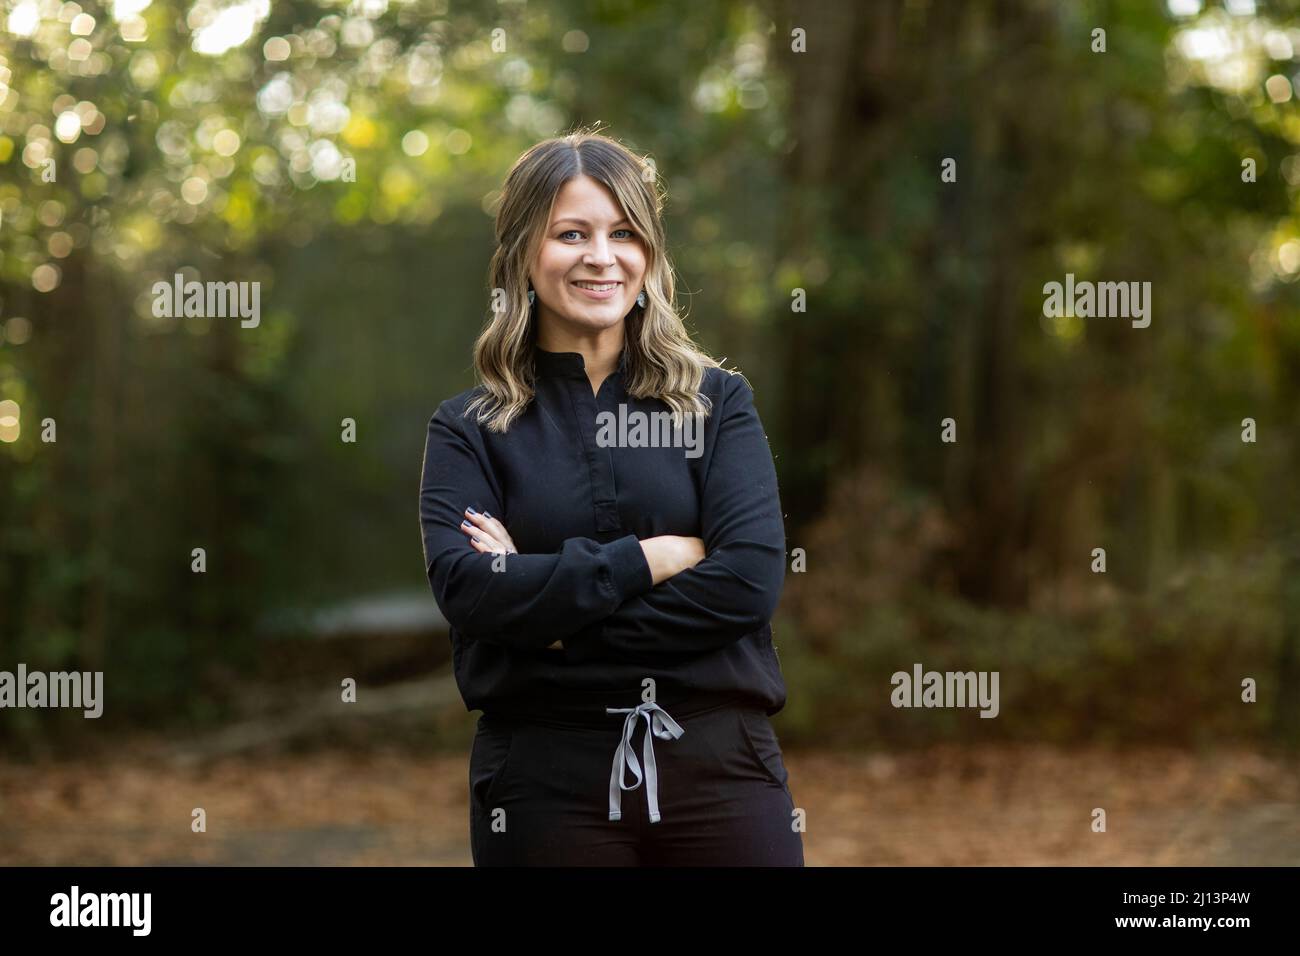 A young cosmetologist standing outside among green trees for a headshot with copy space Stock Photo